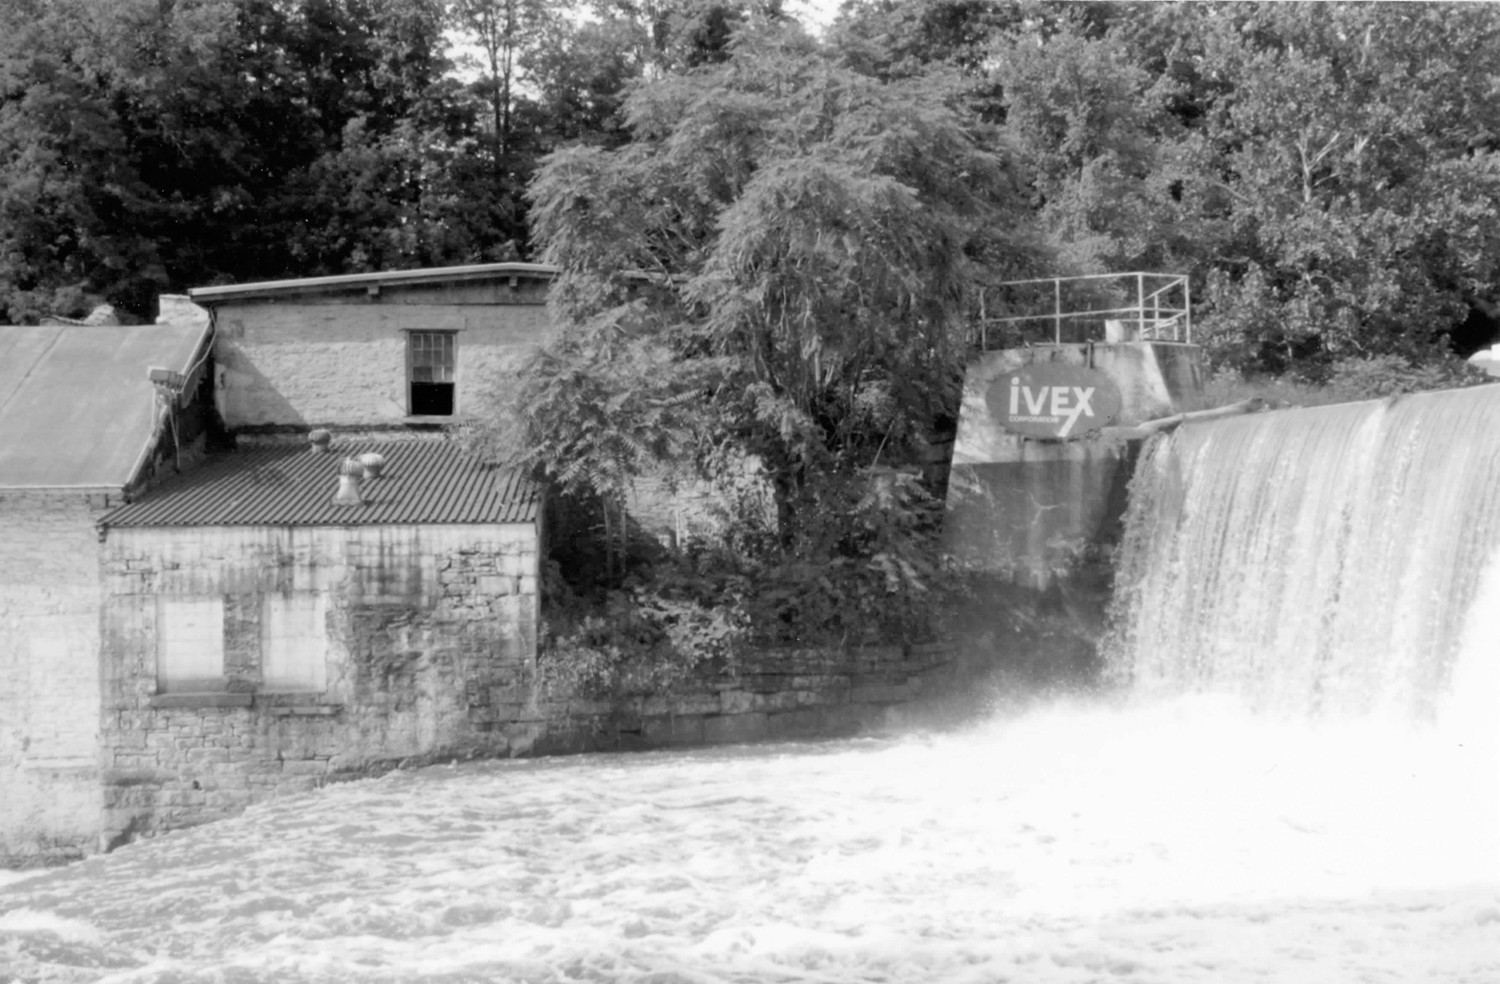 Adams Bag Company Paper Mill and Sack Factory, Chagrin Falls Ohio Engine Room and Dam, looking north (2012)